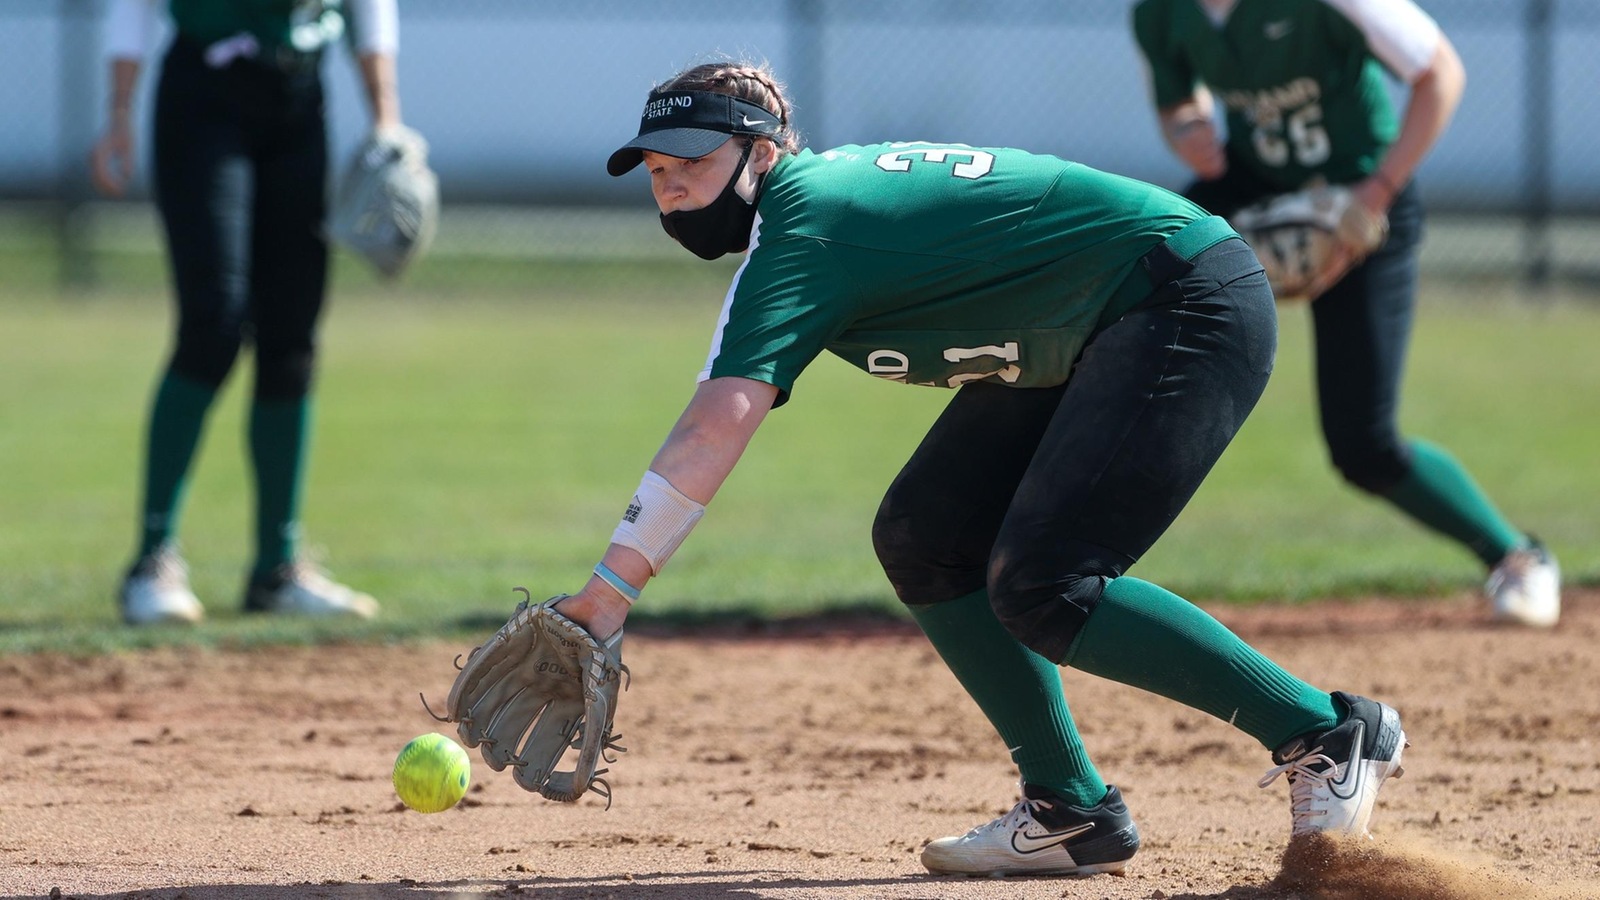 Cleveland State Softball Hosts Robert Morris to Conclude Season